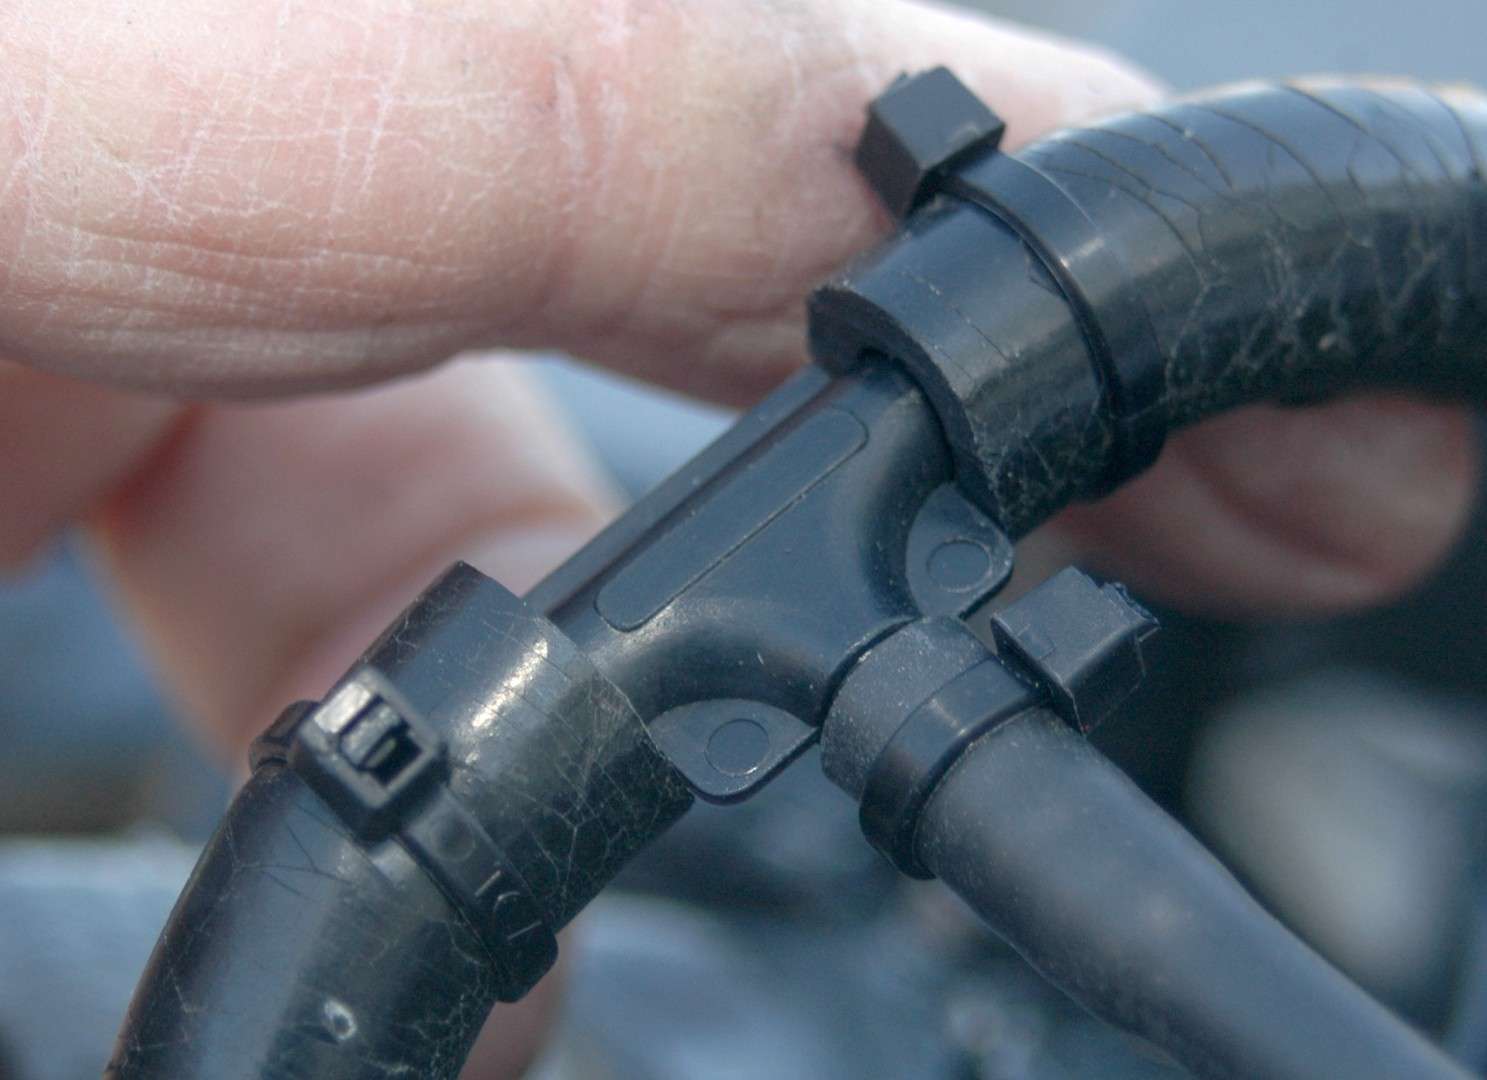 <em>INSTALLING A WATER PRESSURE GAUGE</em>
<br>The water pressure hose, again, had to be heated and wetted to go over the fitting. All lines are fastened with plastic ties.